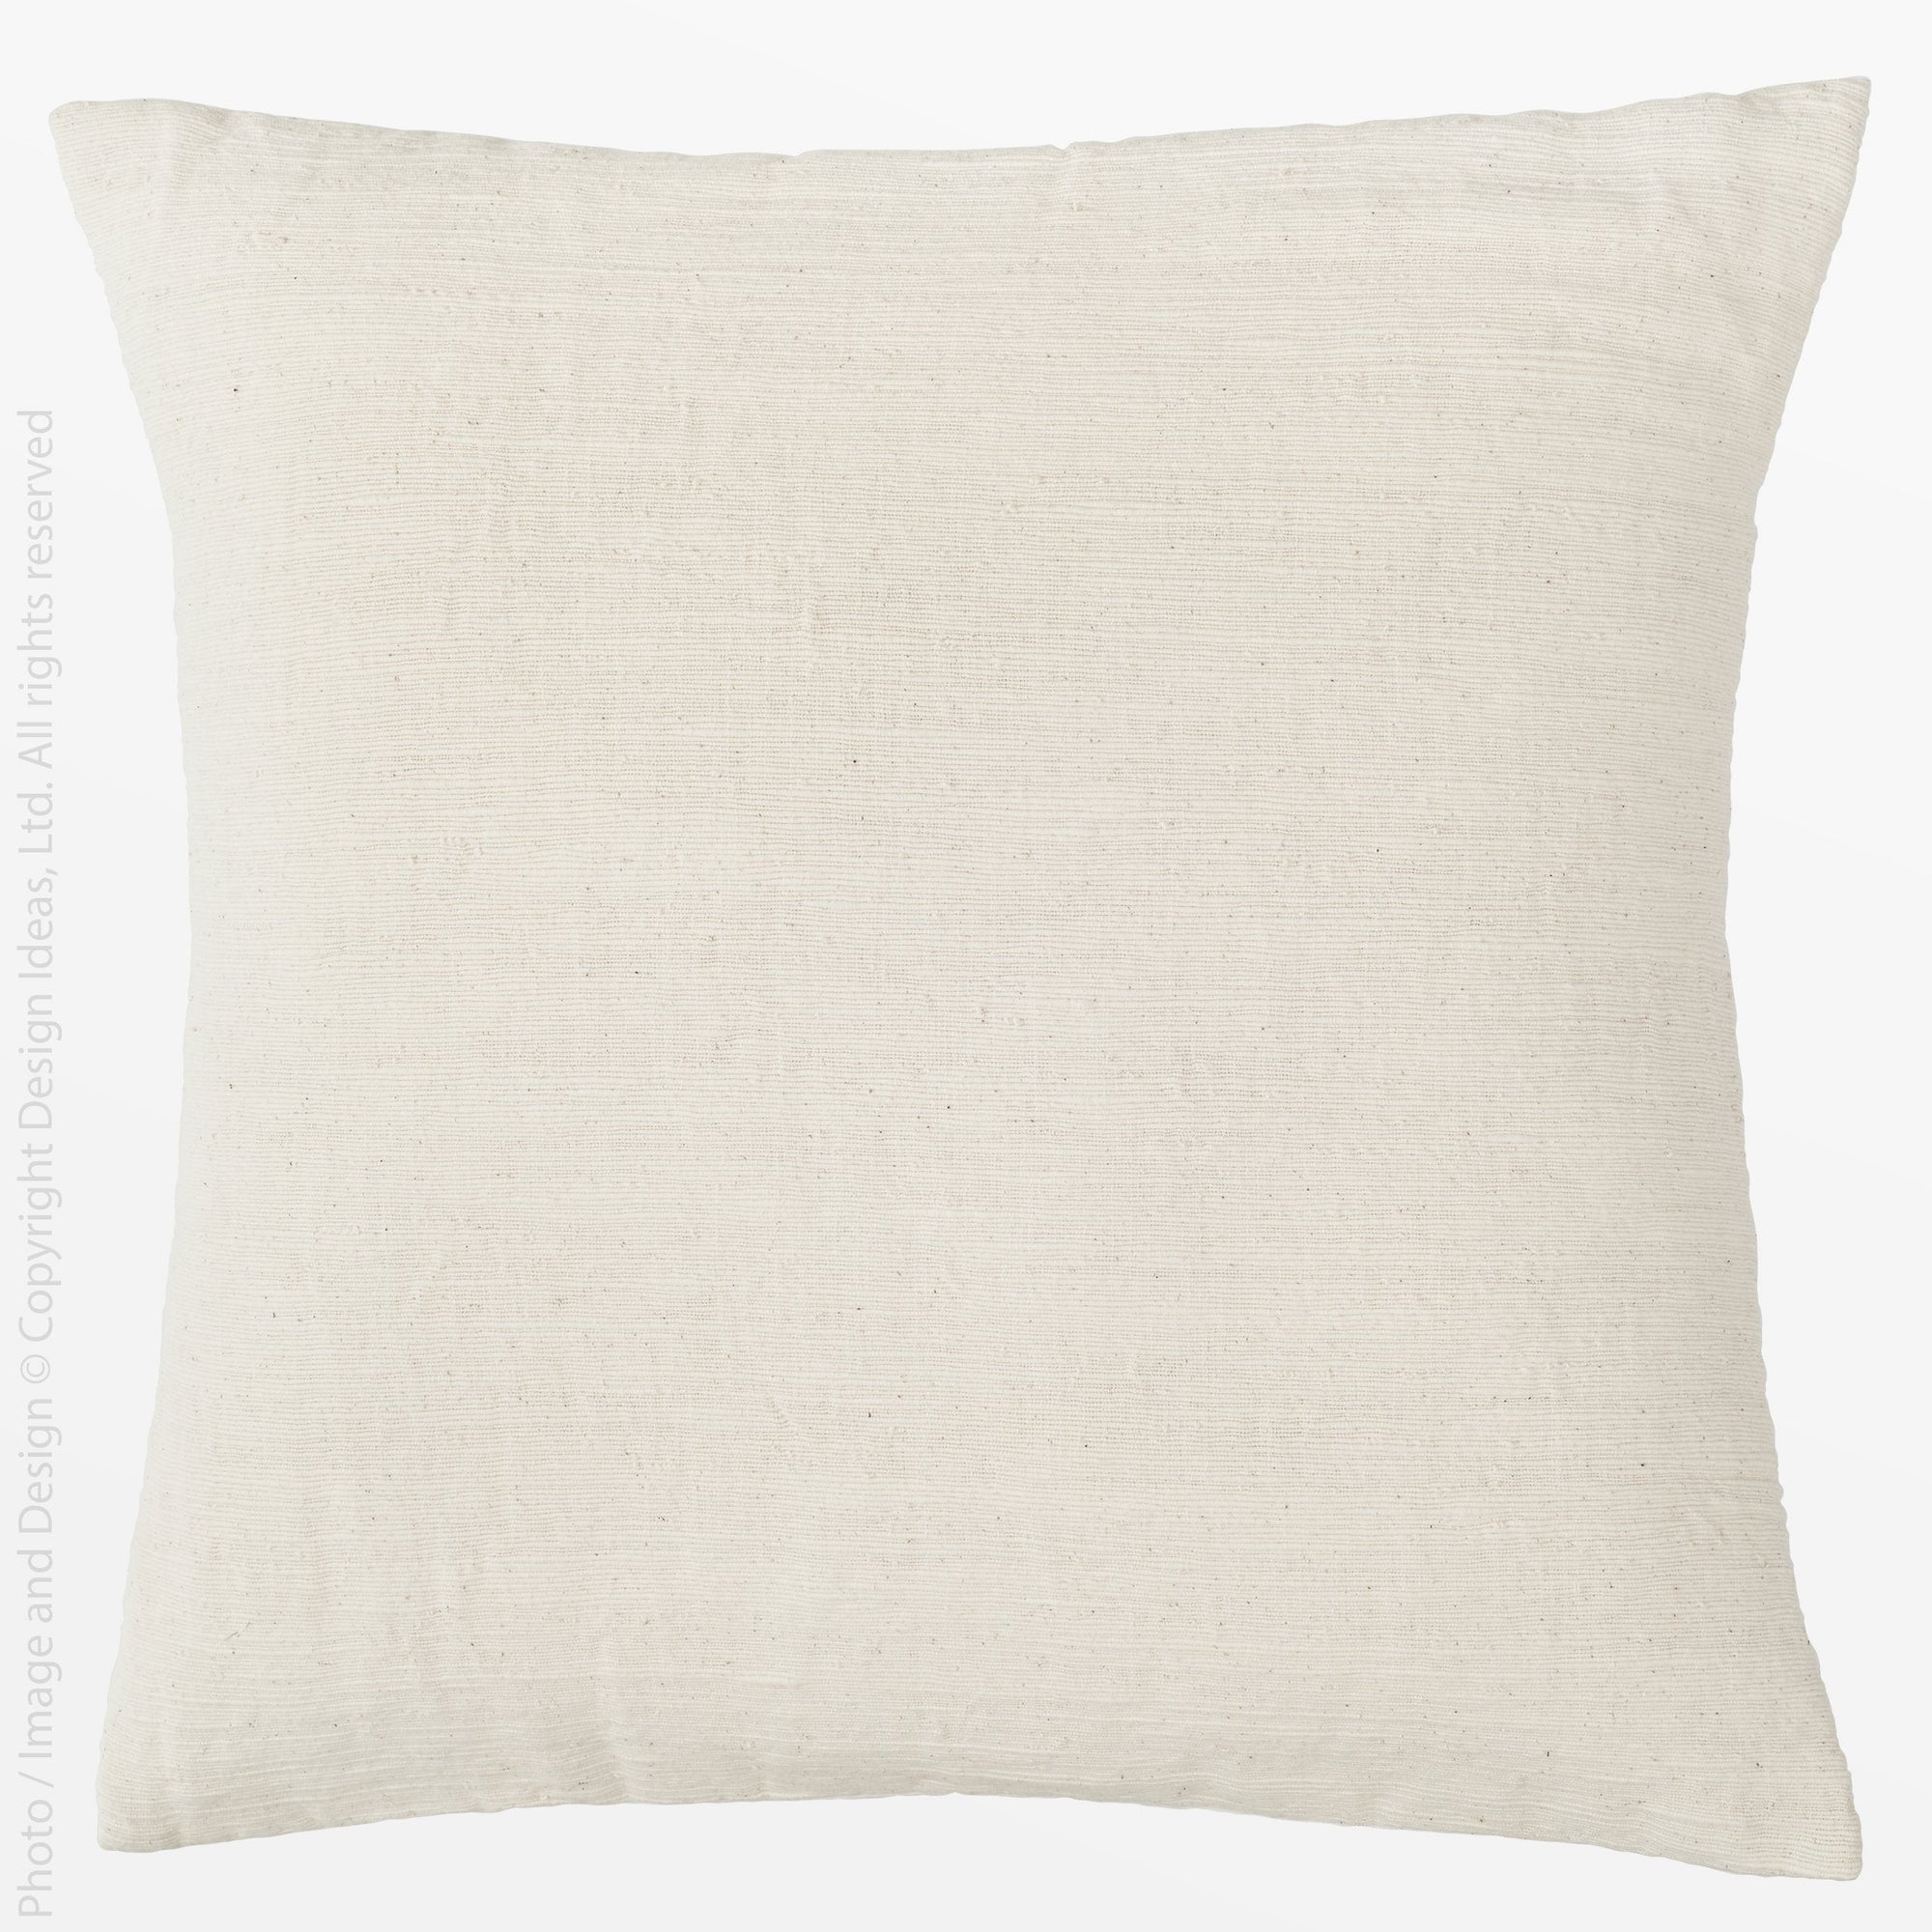 Capri Woven Cotton Cushion Cover (Small) - Natural Color | Image 1 | From the Capri Collection | Skillfully Woven with natural cotton for long lasting use | Available in natural color | texxture home